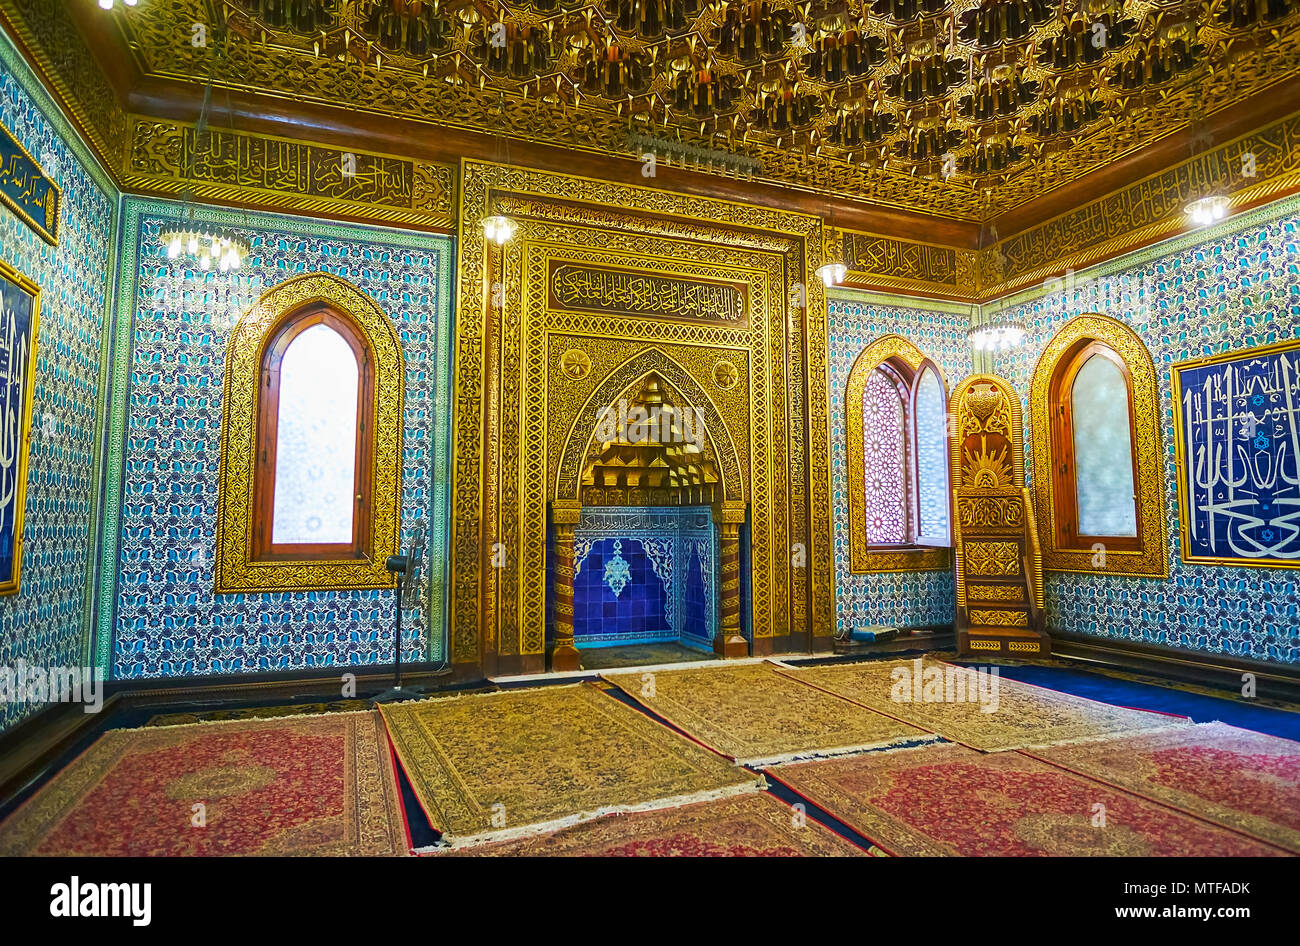 CAIRO, EGYPT - DECEMBER 24, 2017: Mihrab of Manial Palace mosque decorated with intricate golden patterns on carved wood, muqarnas in arch, bright blu Stock Photo